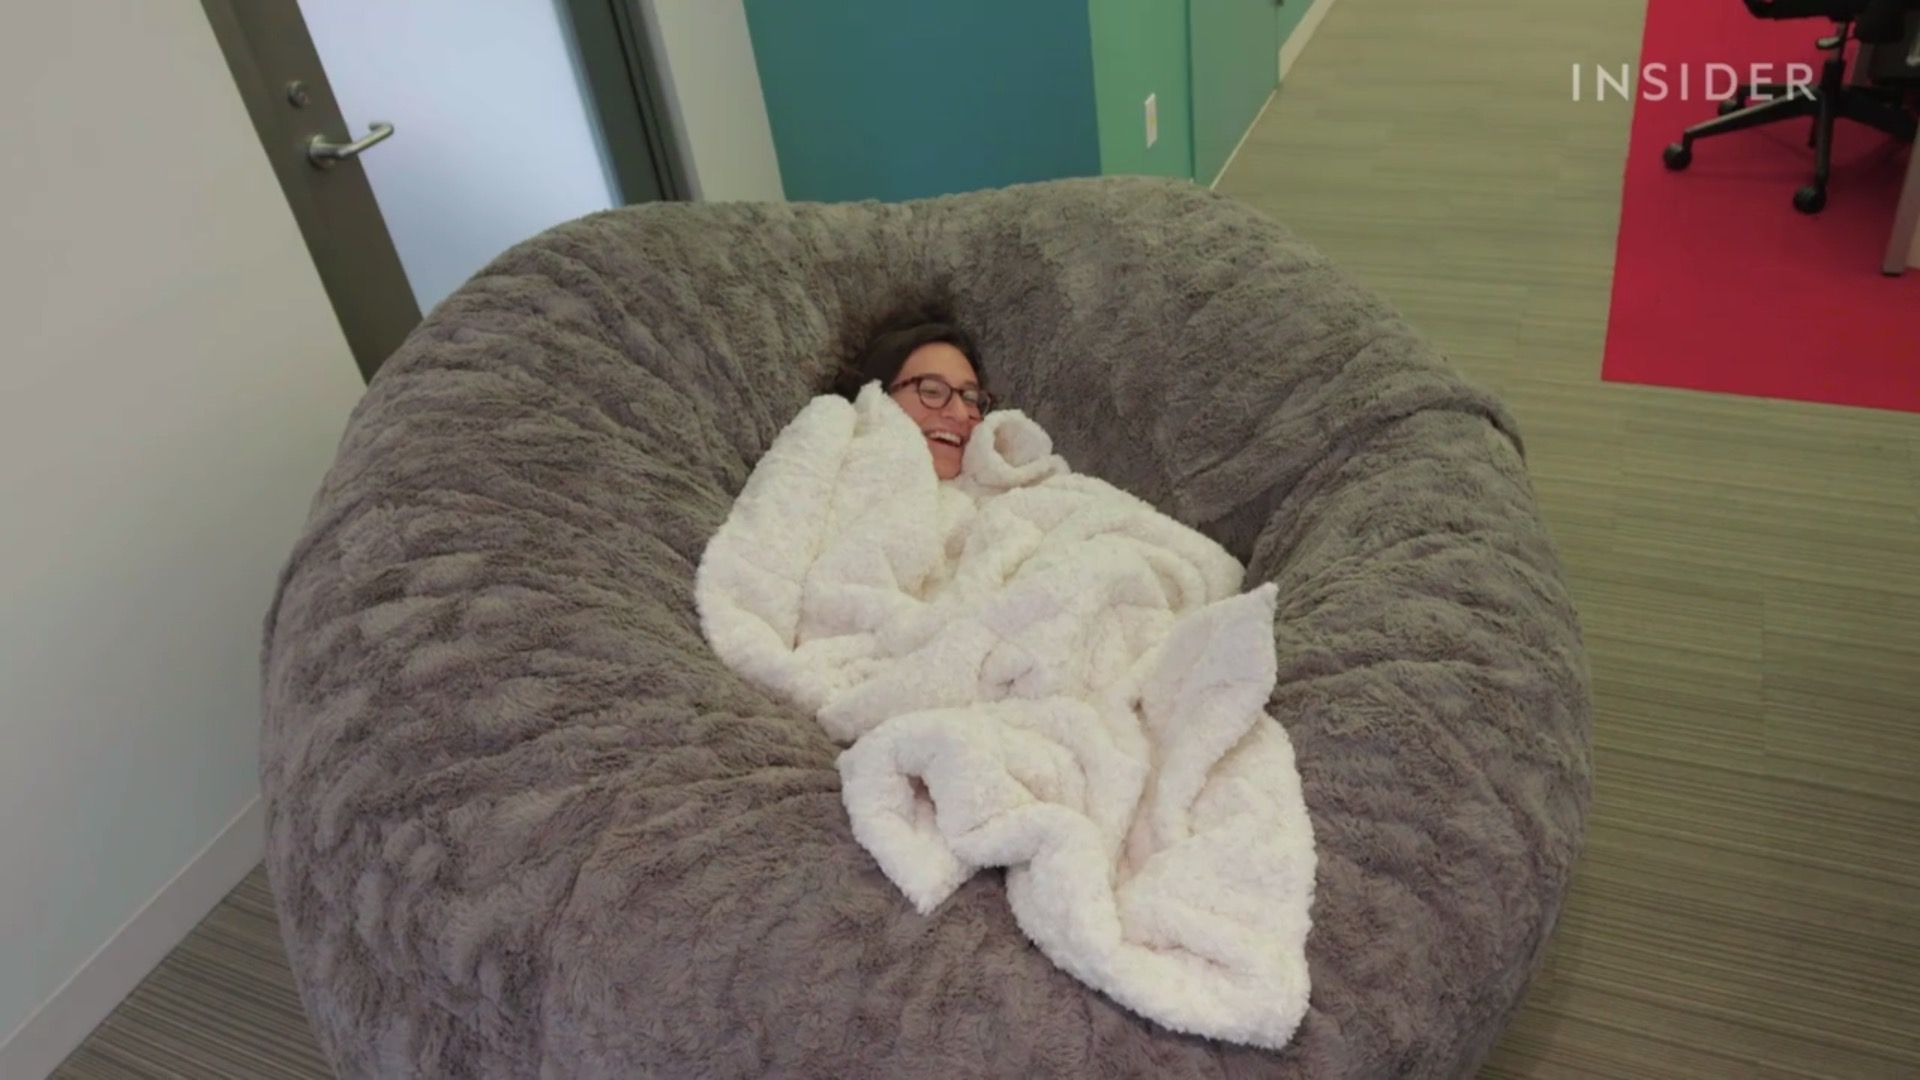 This massive pillow chair is everything that is good with the world